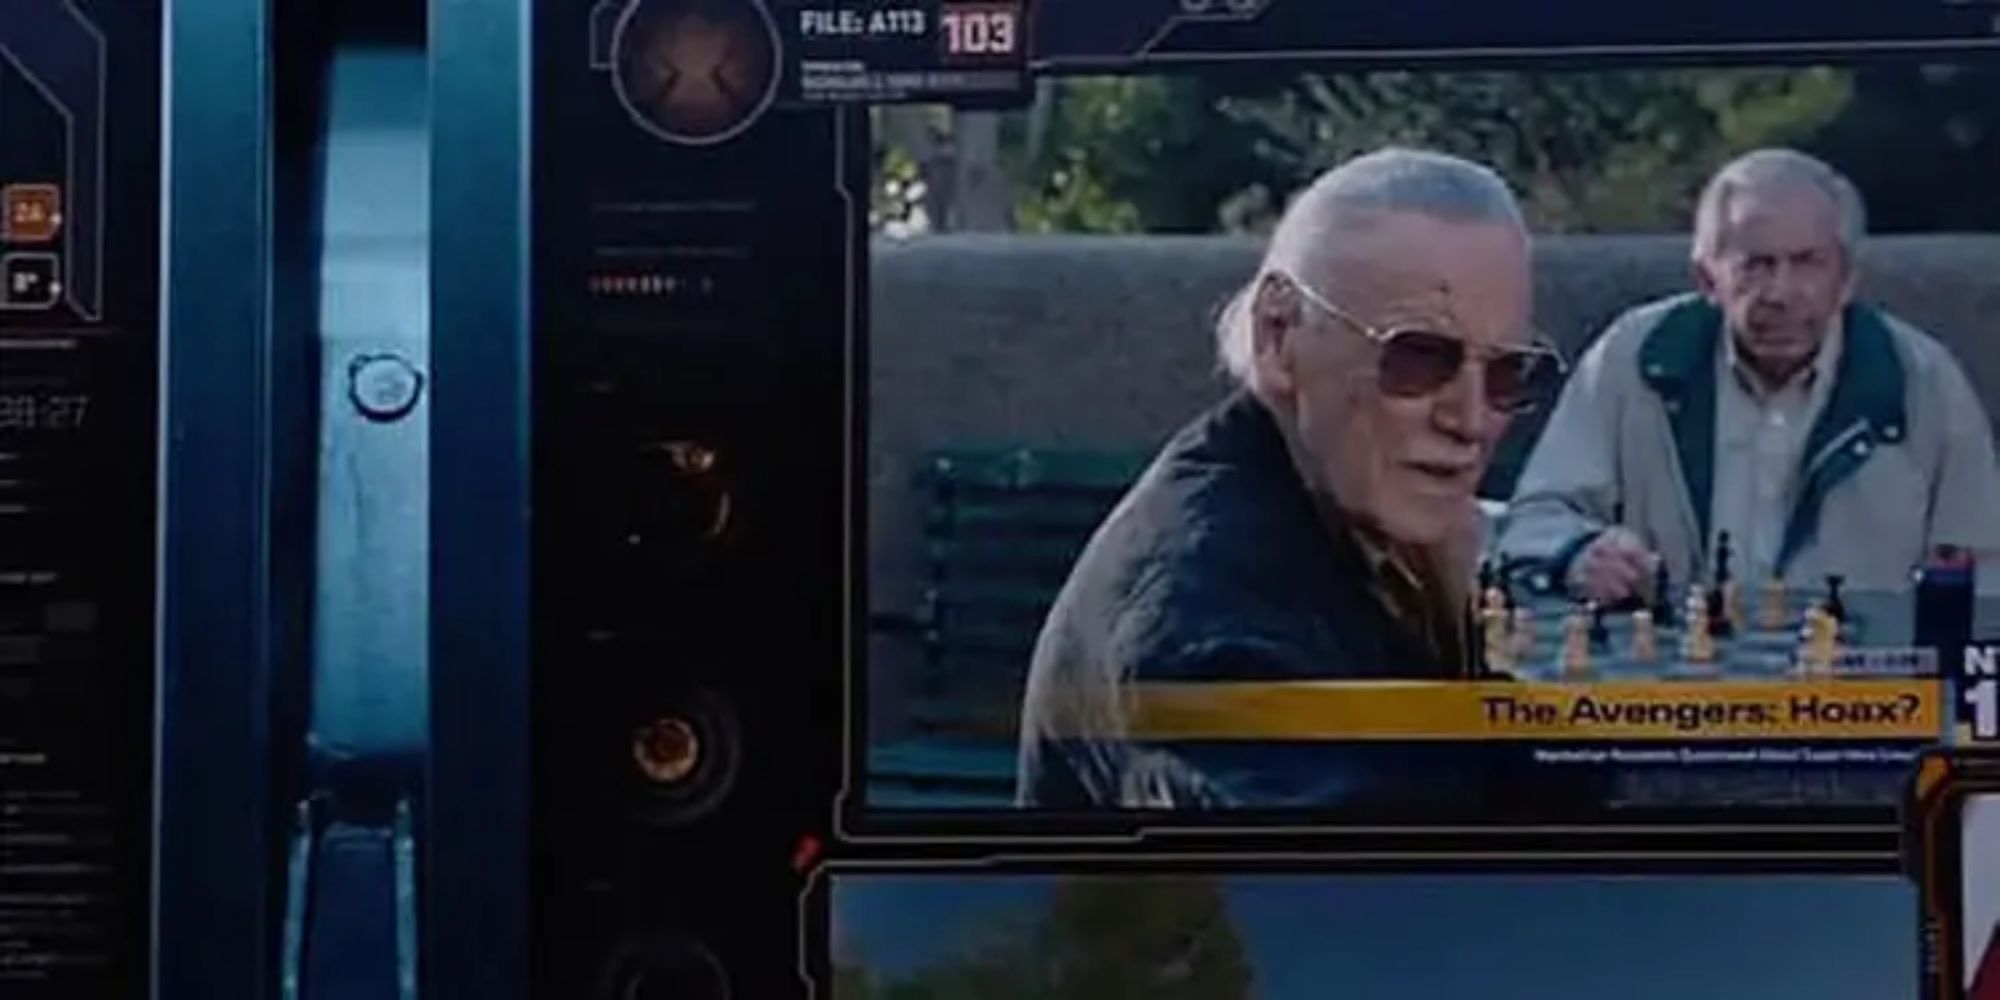 The Avengers - Stan Lee cameo